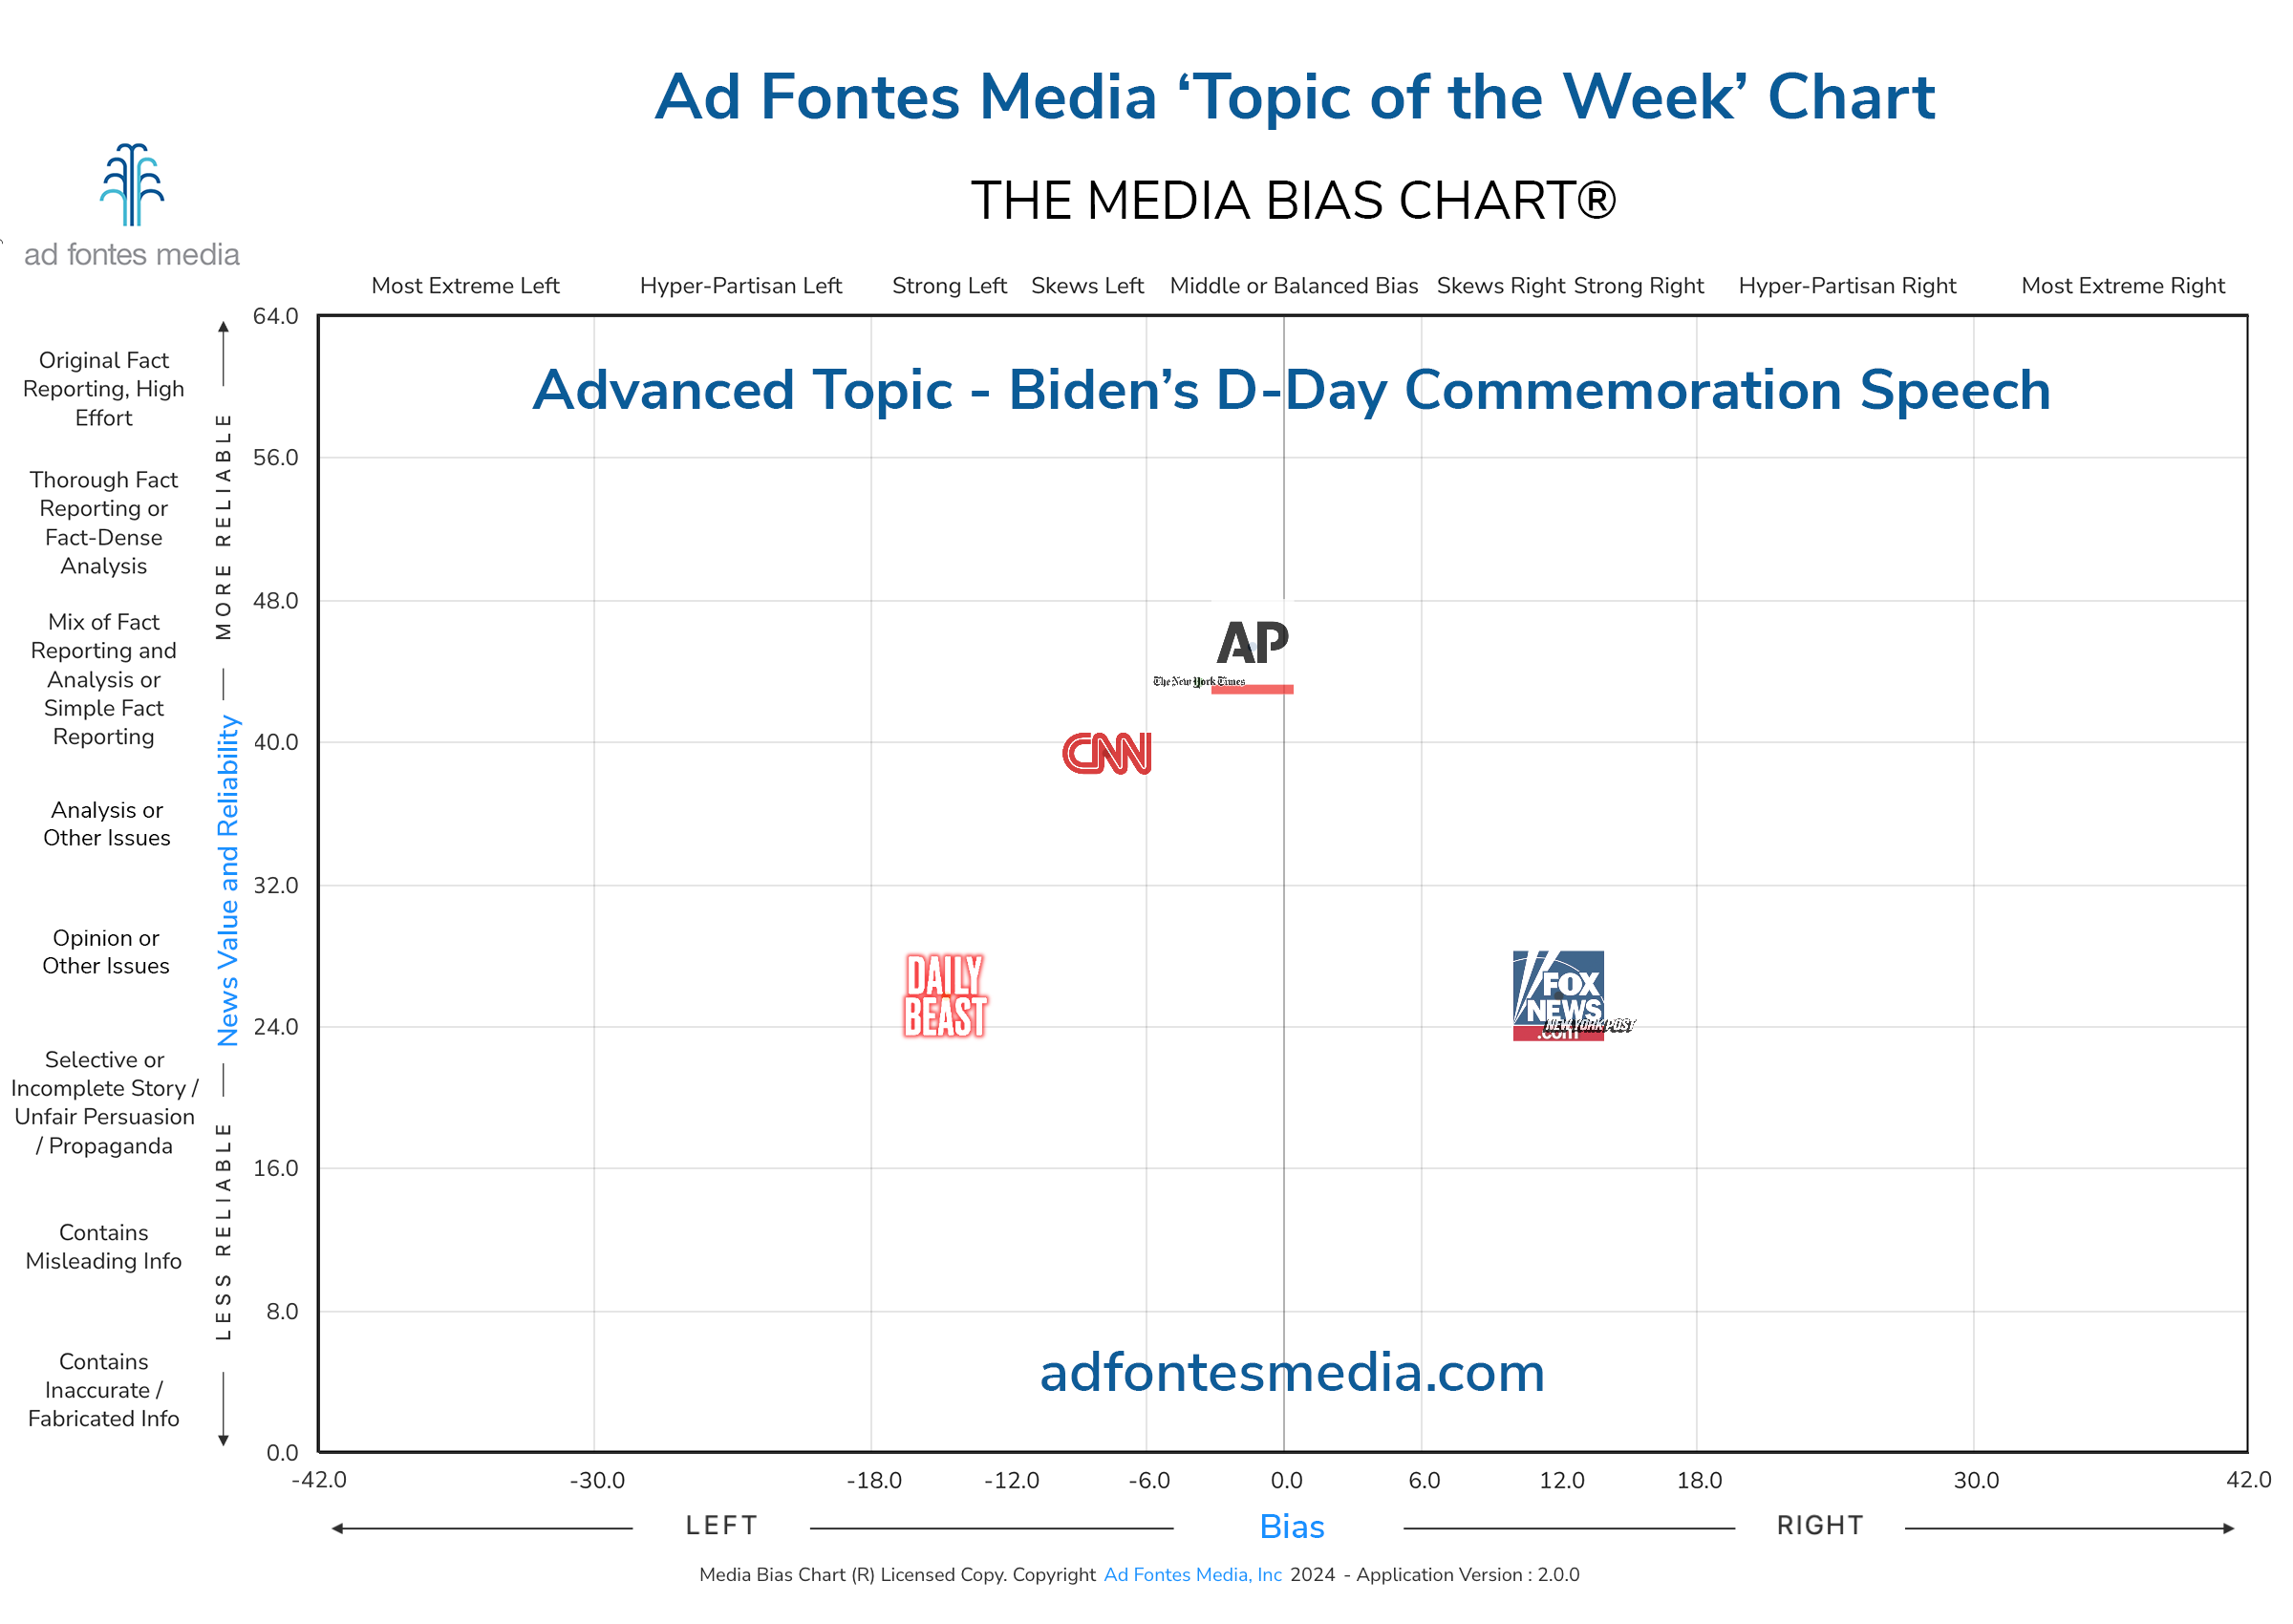 Media Bias Chart examines media coverage of the event, which ranged from praise about the speech to arguments about Biden’s mental fitness